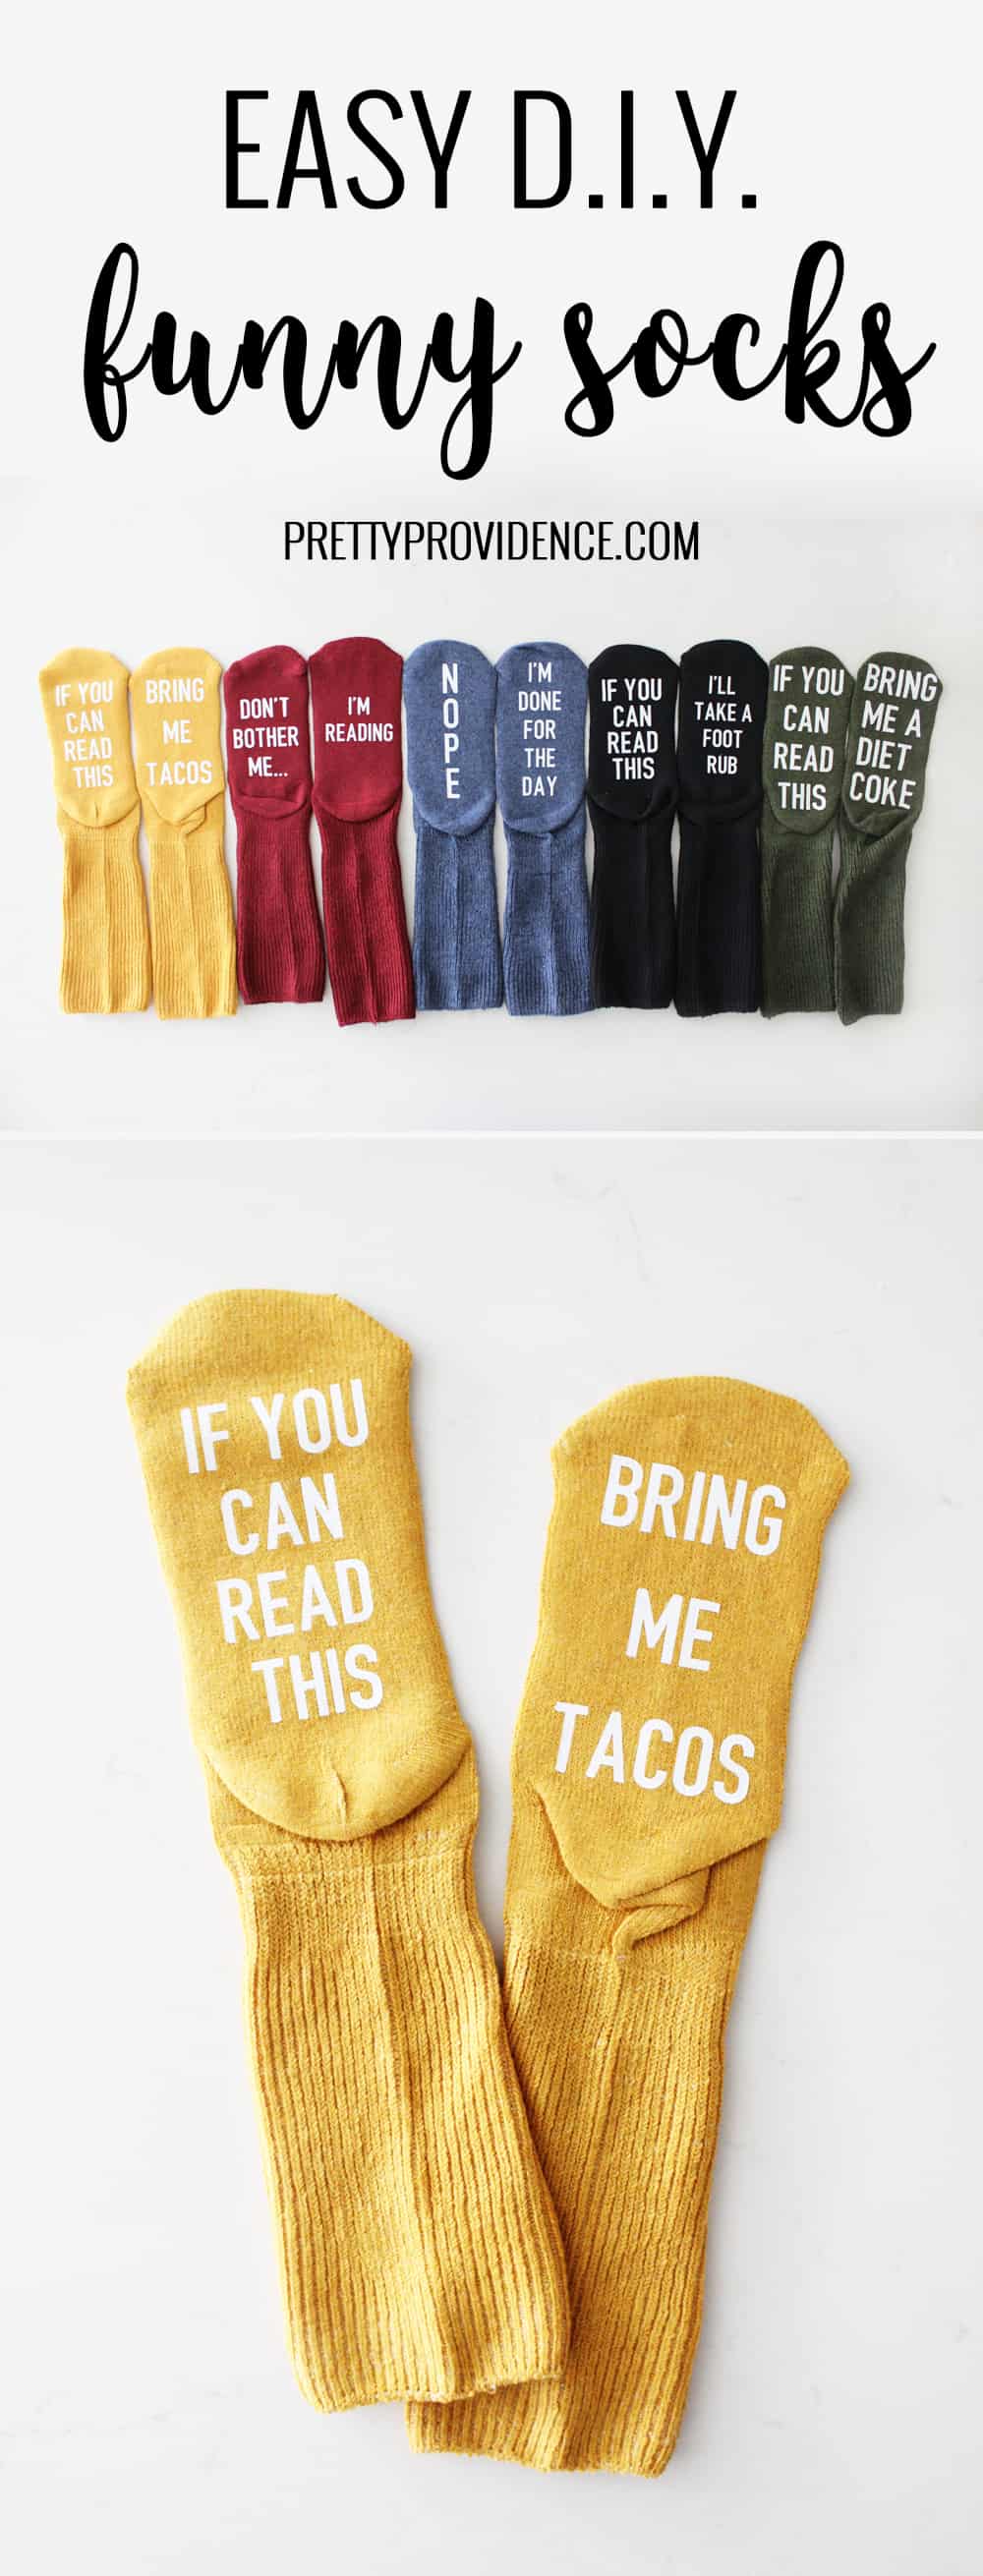 I love this easy funny socks tutorial! They would make perfect gifts for friends or teachers! Cute and easy to customize to fit each persons personality! 